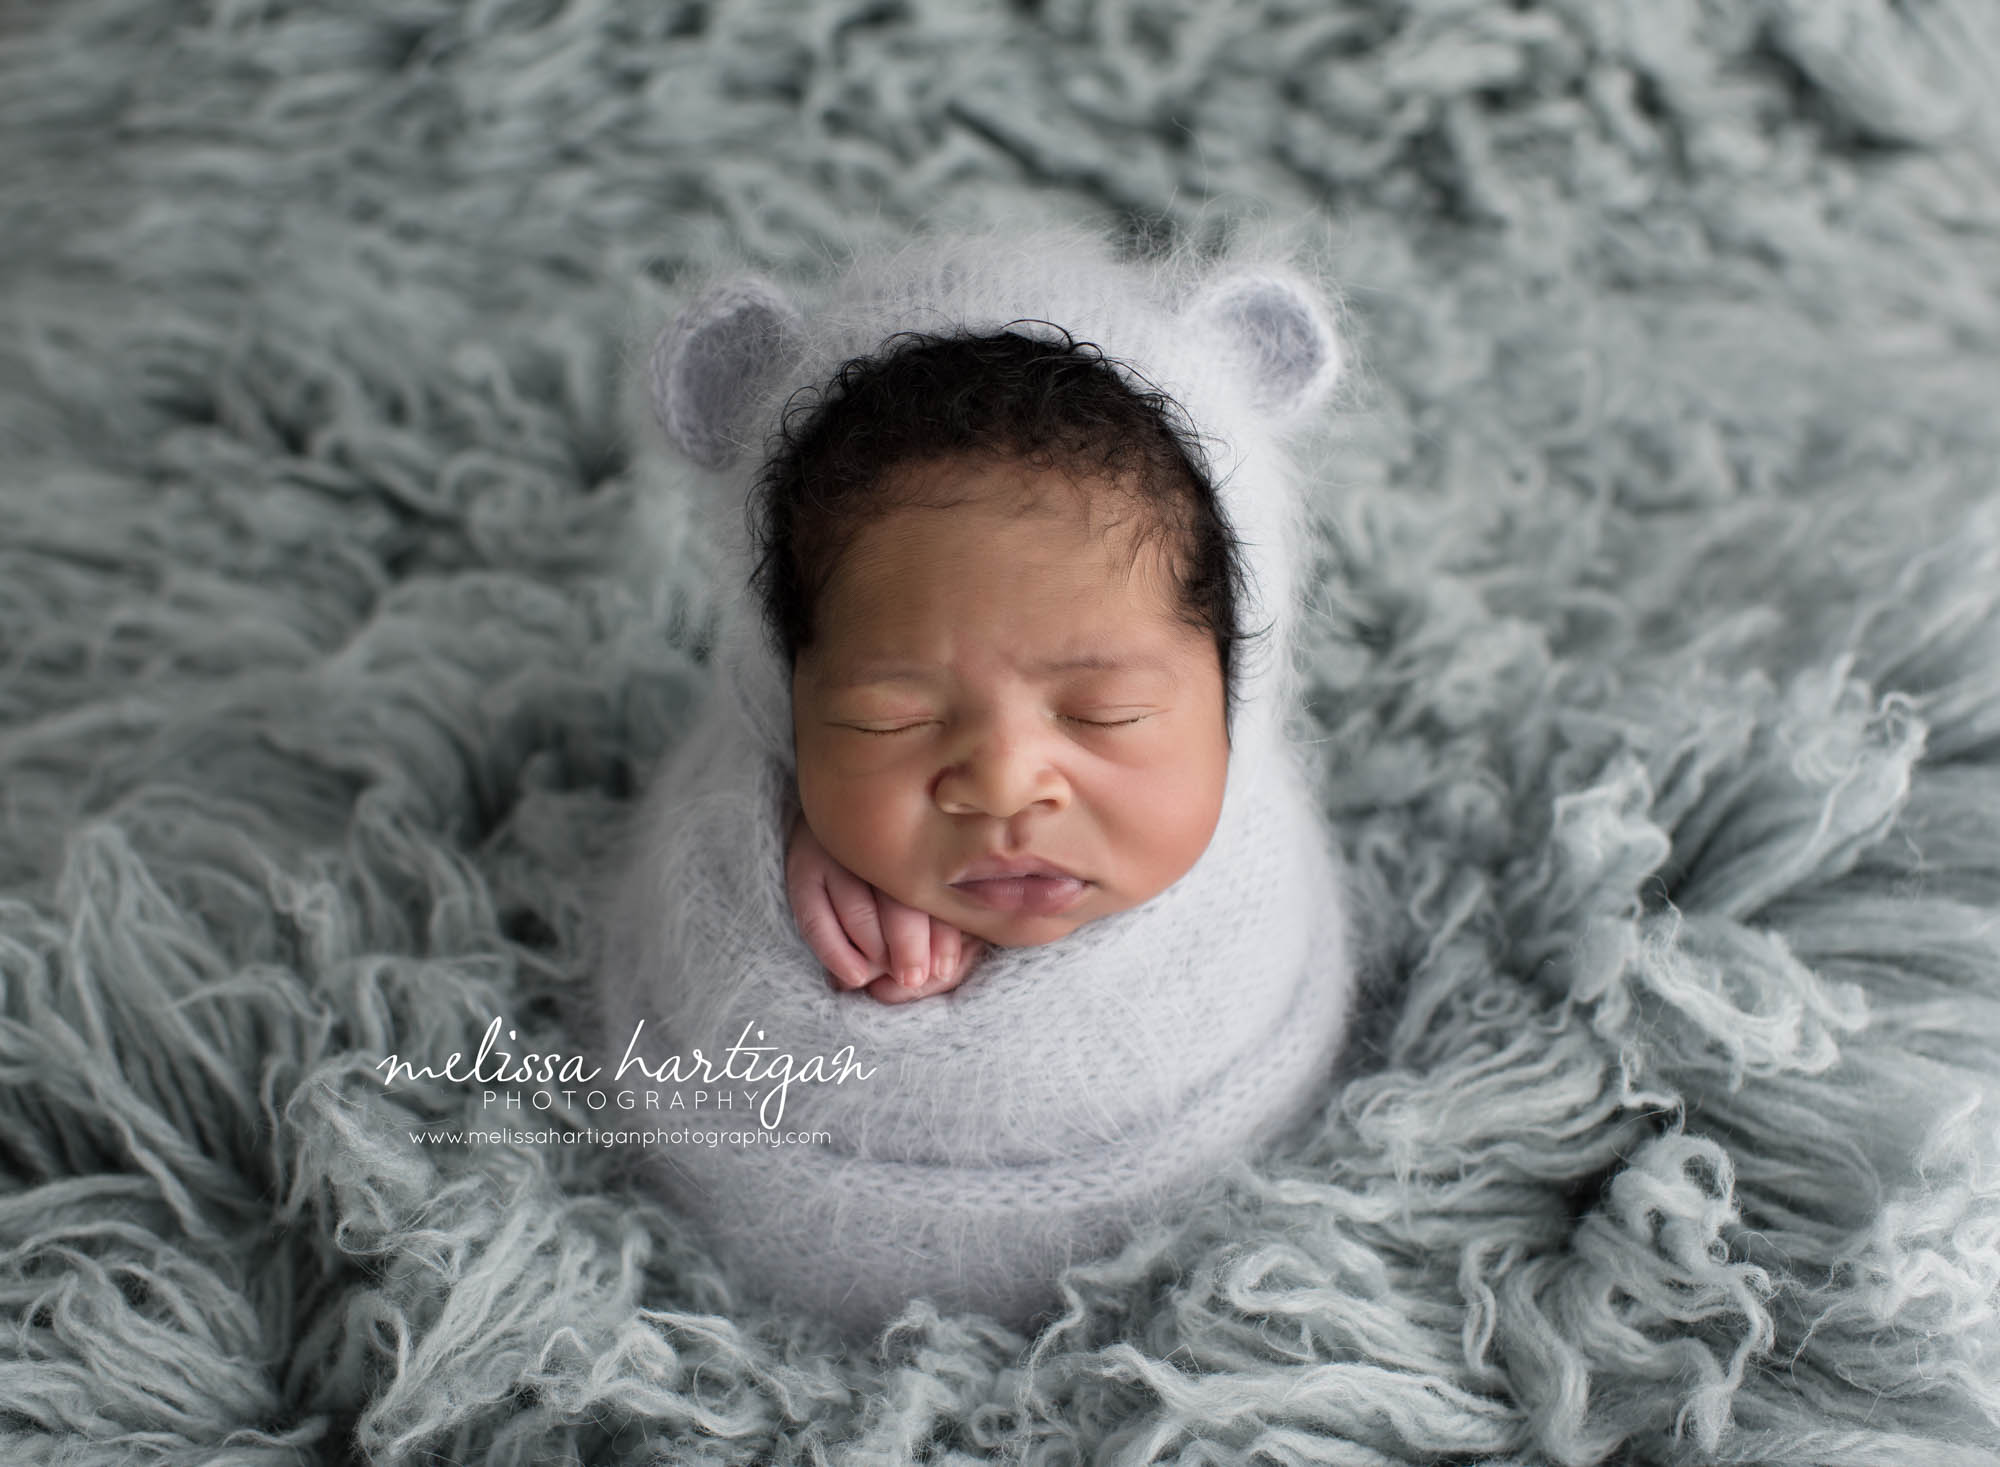 Melissa Hartigan Photography Connecticut Maternity and Newborn CT Photographer Coventry Ct Middlefield CT baby Fairfield county Newborn pose baby boy wrapped in blue with blue knitted hat with ears on a blue flokati